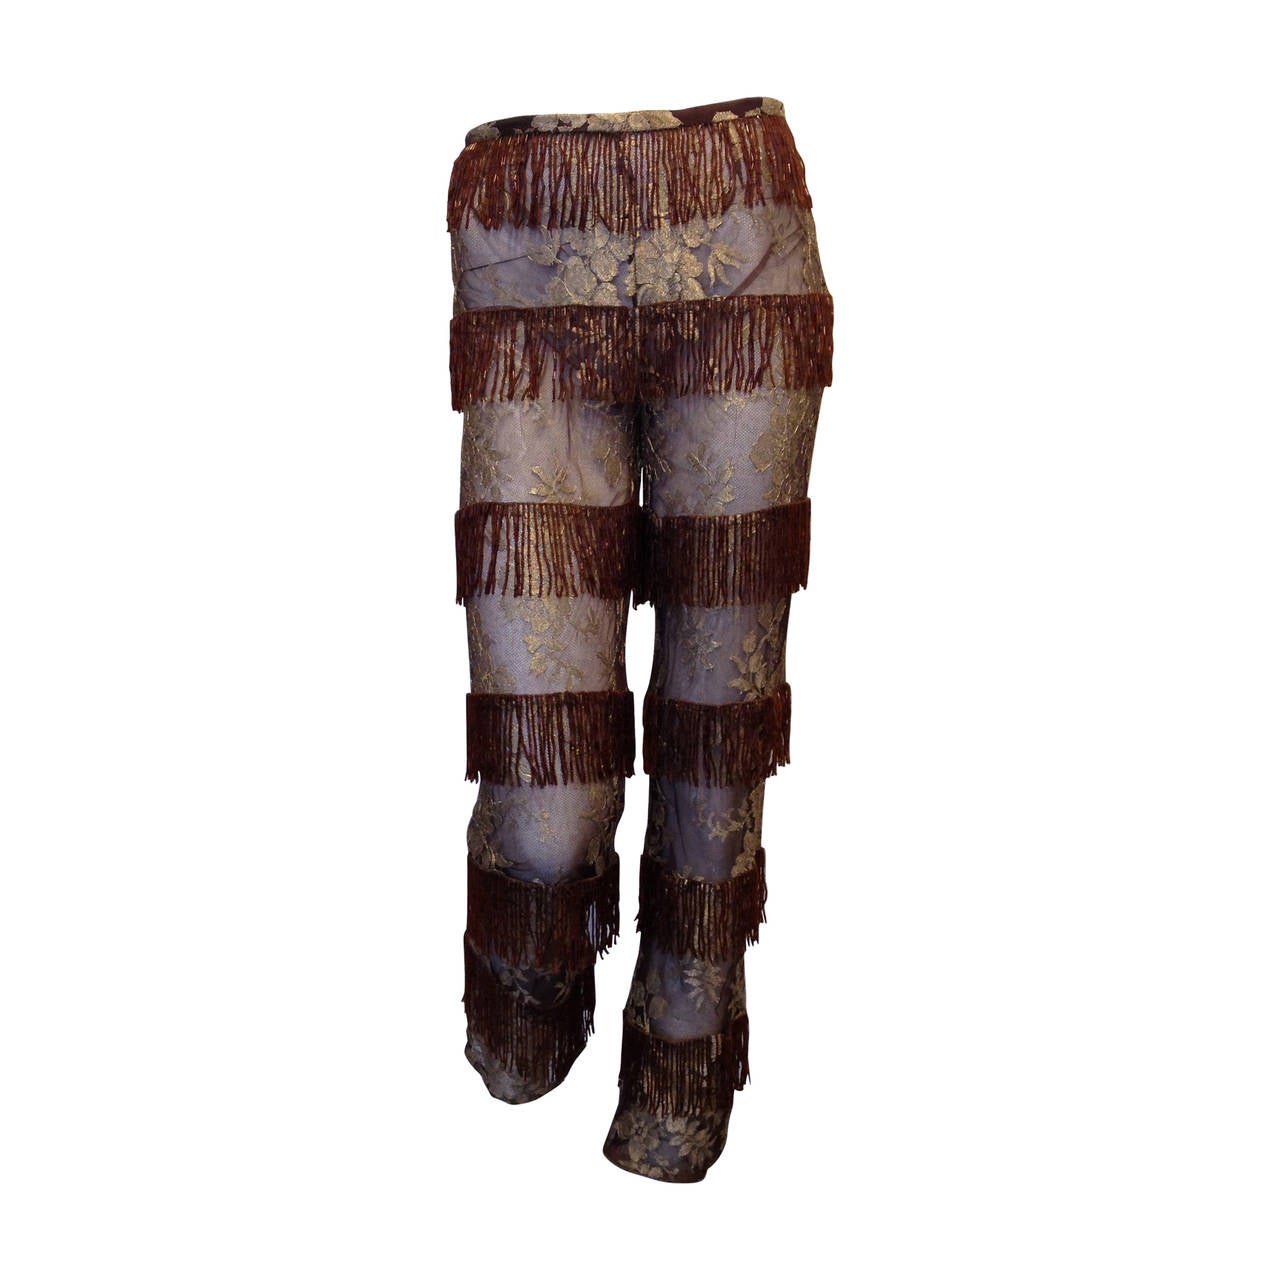 Dolce & Gabbana Sheer Embroidery Pants with Fringe